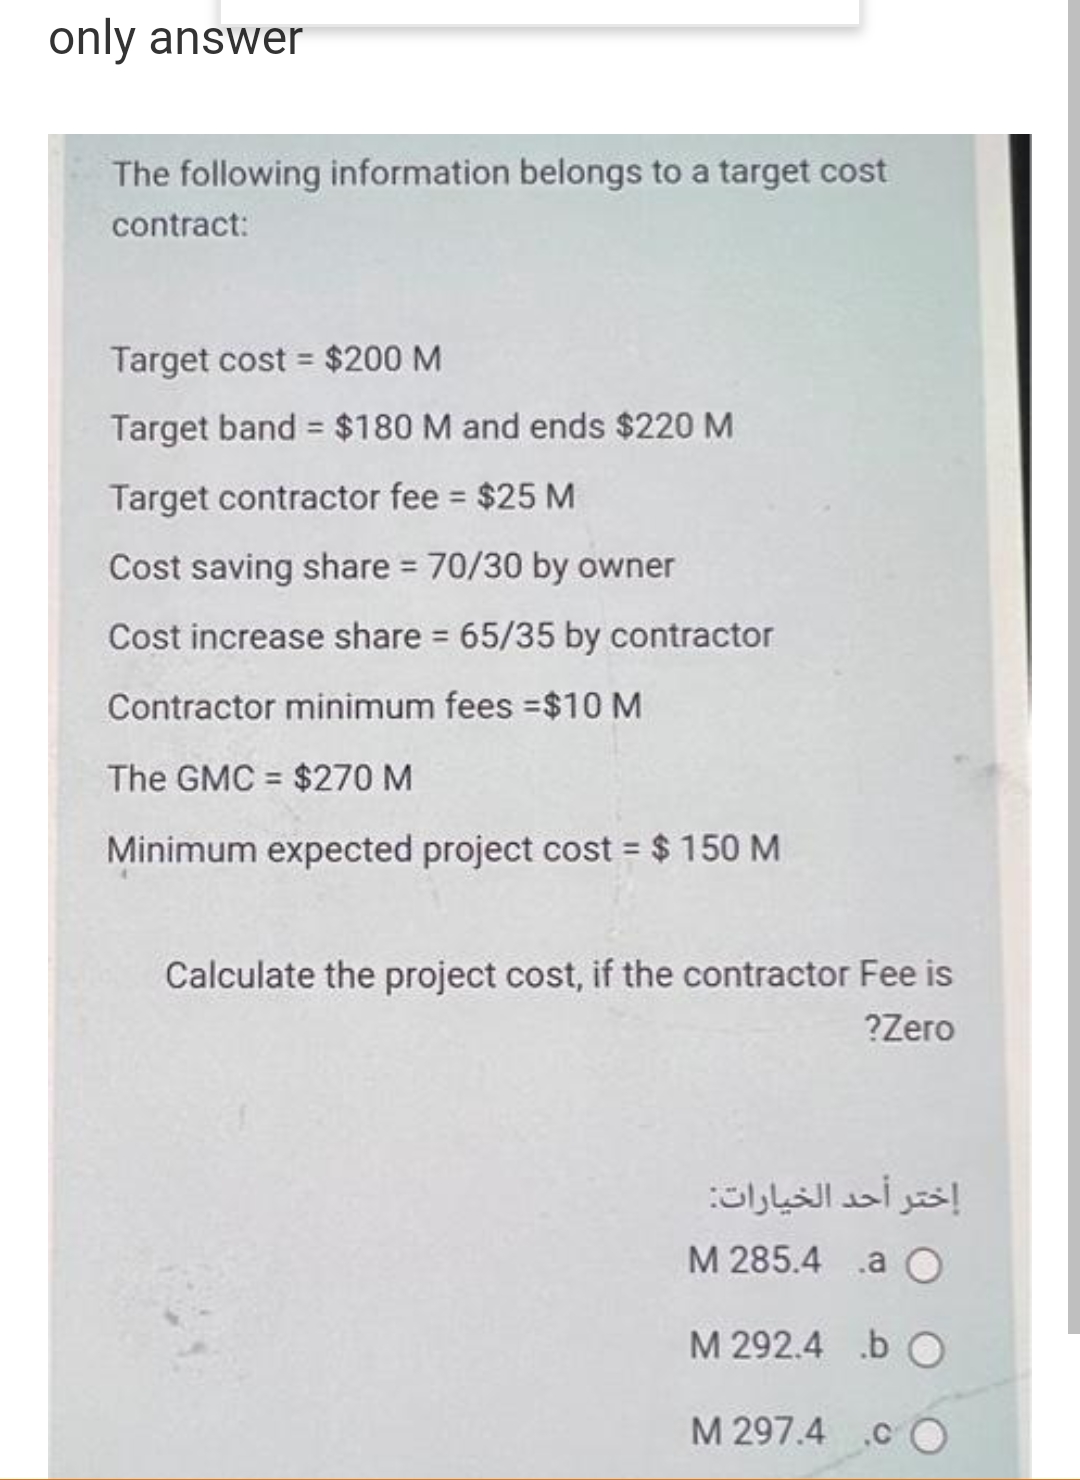 only answer
The following information belongs to a target cost
contract:
Target cost = $200 M
%3D
Target band $180 M and ends $220 M
Target contractor fee = $25 M
%3D
Cost saving share = 70/30 by owner
Cost increase share 65/35 by contractor
Contractor minimum fees =$10 M
The GMC = $270 M
%3D
Minimum expected project cost = $ 150 M
%3D
Calculate the project cost, if the contractor Fee is
?Zero
إختر أحد الخيارات:
М 285.4 .а О
M 292.4 b O
M 297.4 .c
